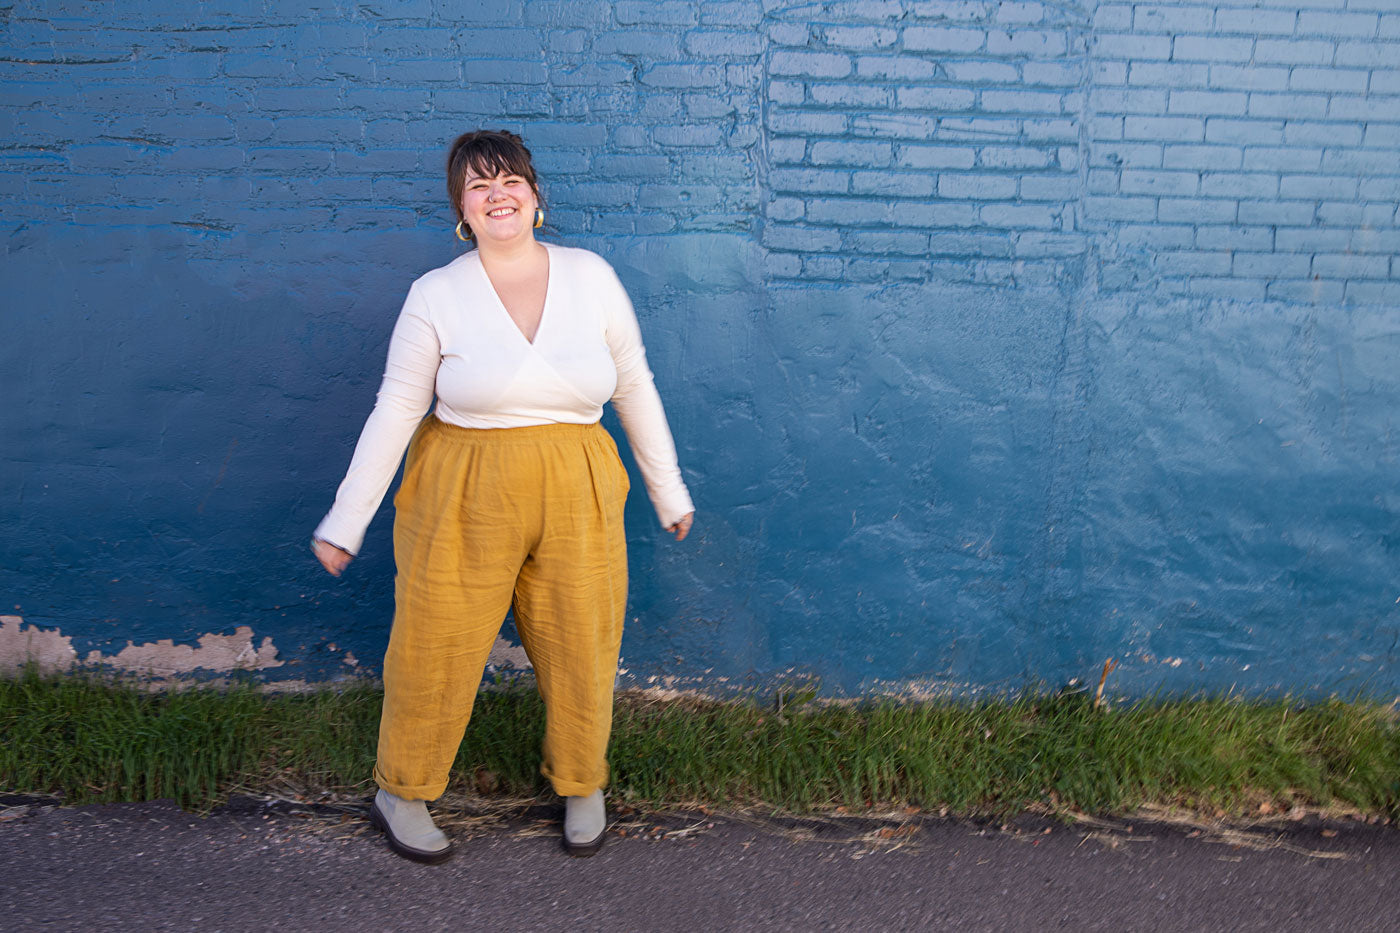 Marta is standing in front of a blue brick wall. She is wearing a long sleeve white wrap top and yellow top. 